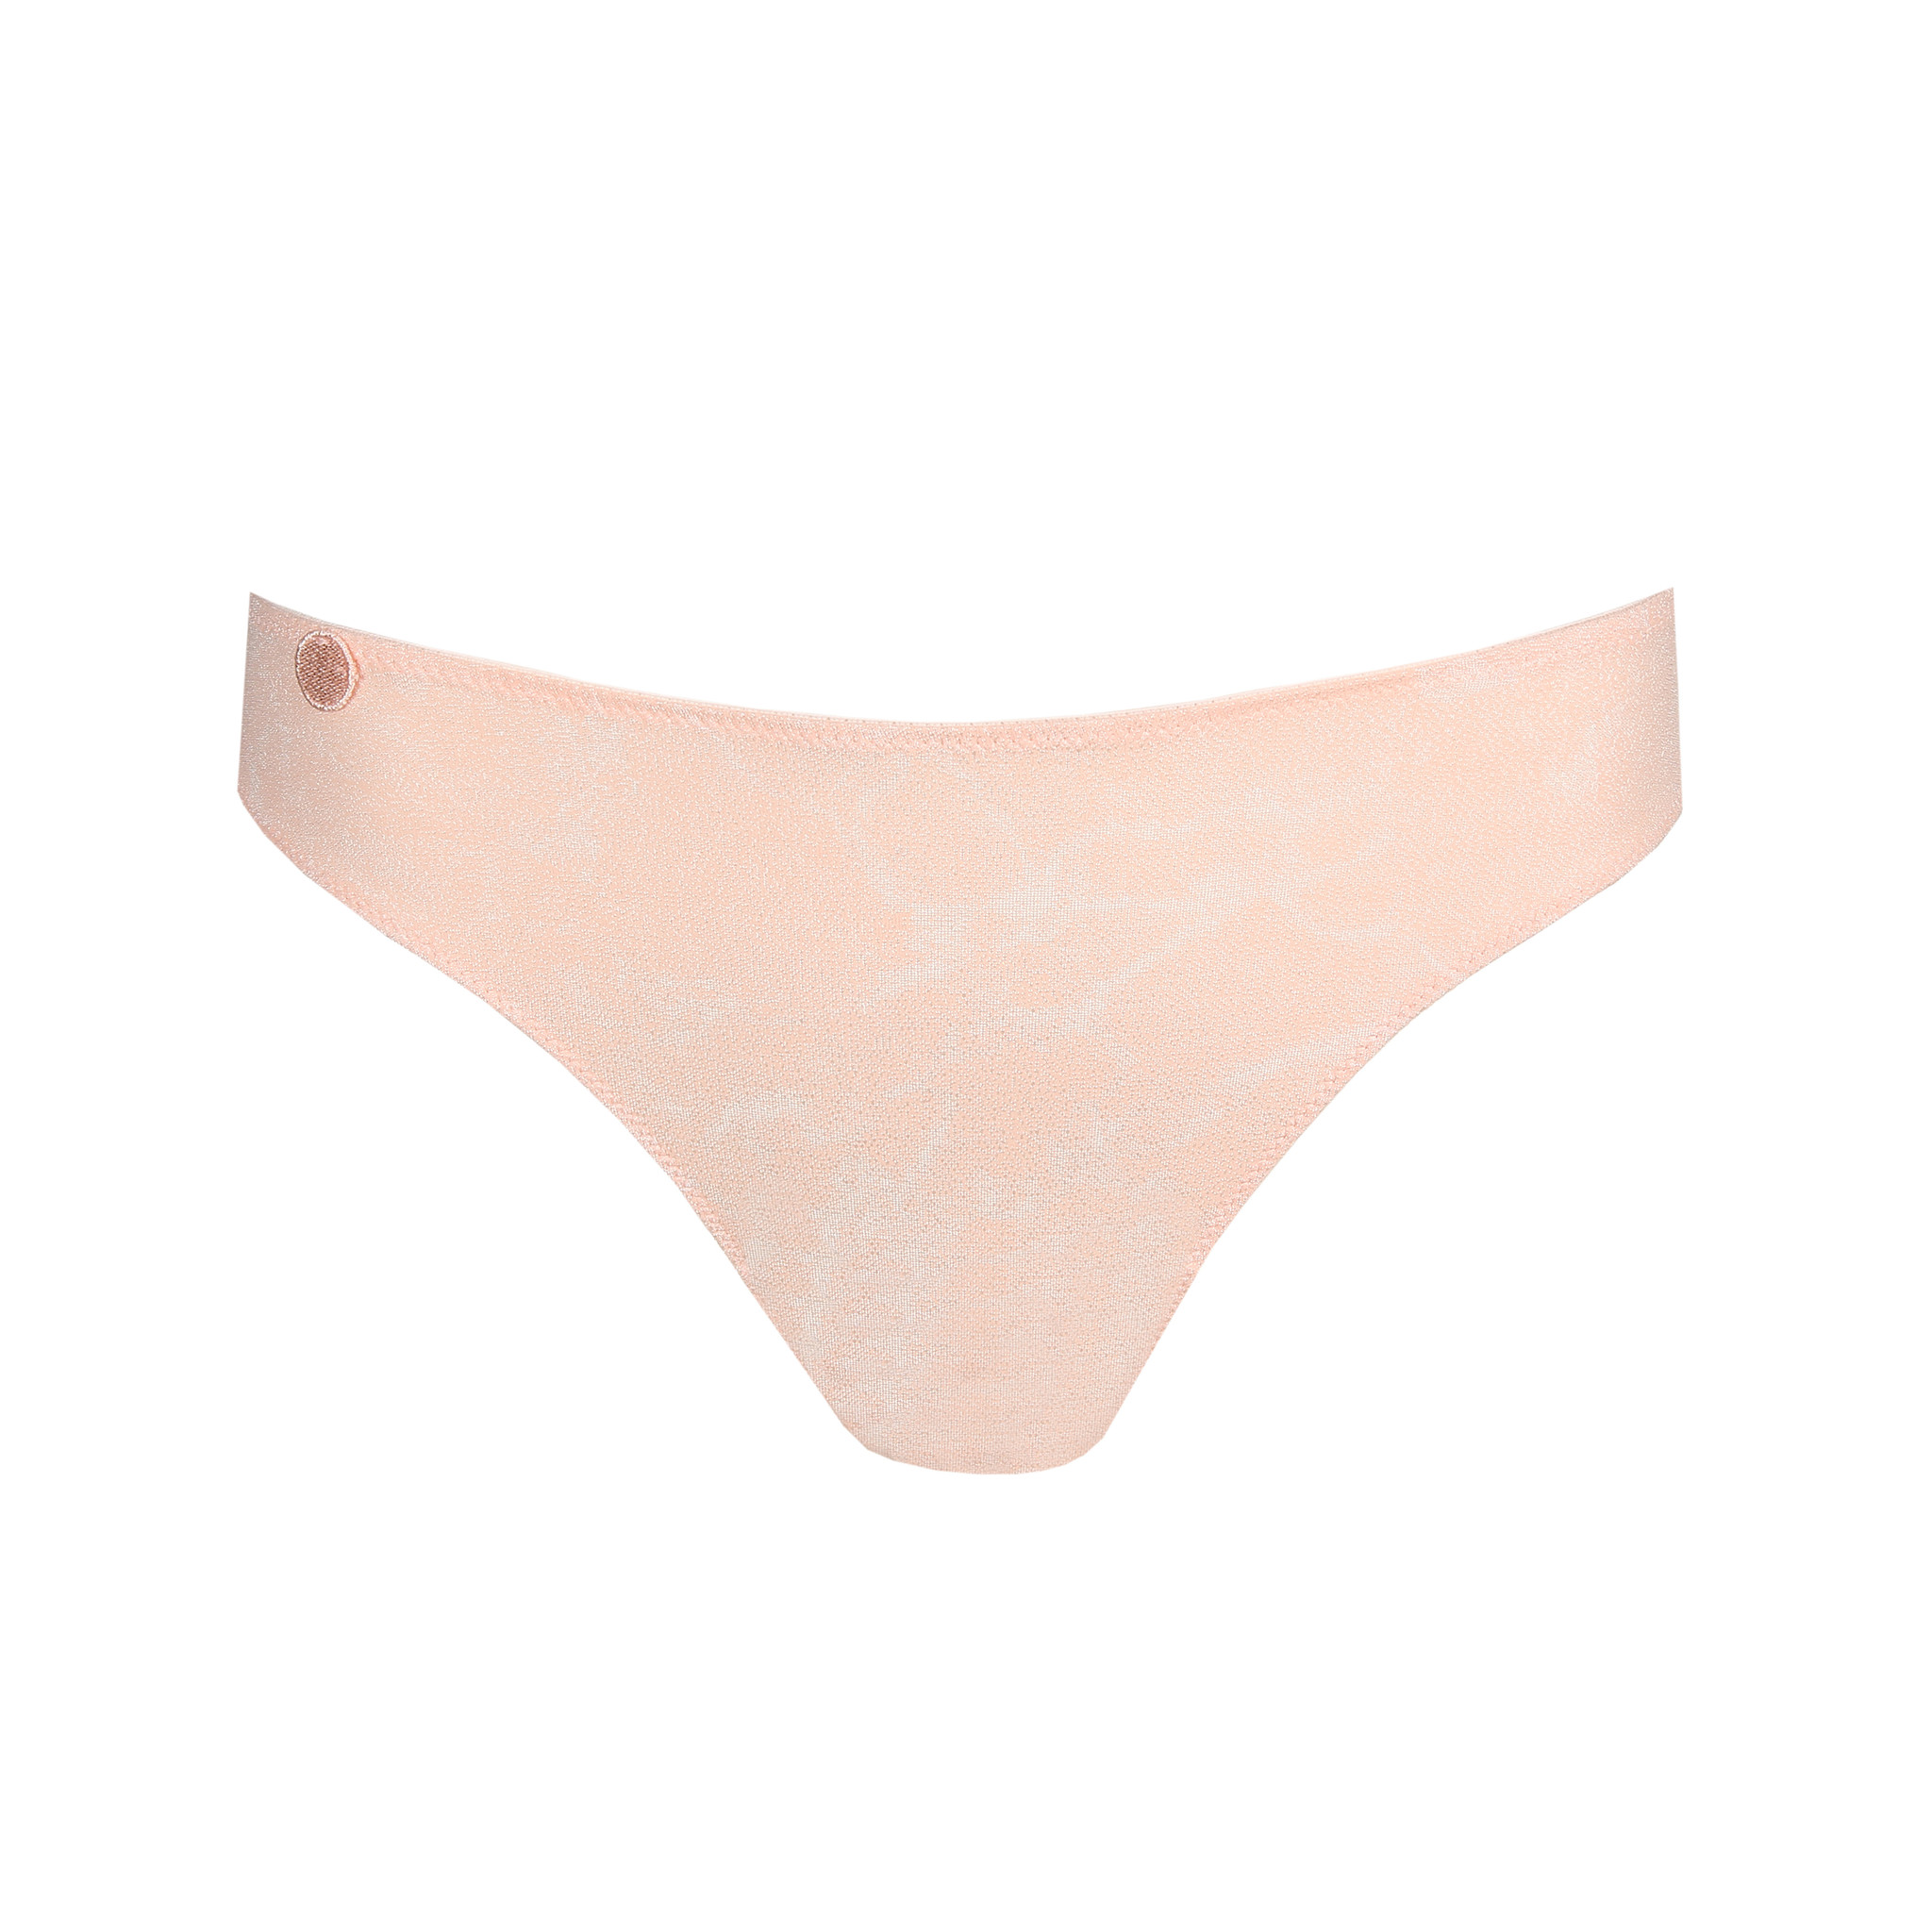 Tom Thong Panty Crystal Pink 0620820 - Lace & Day